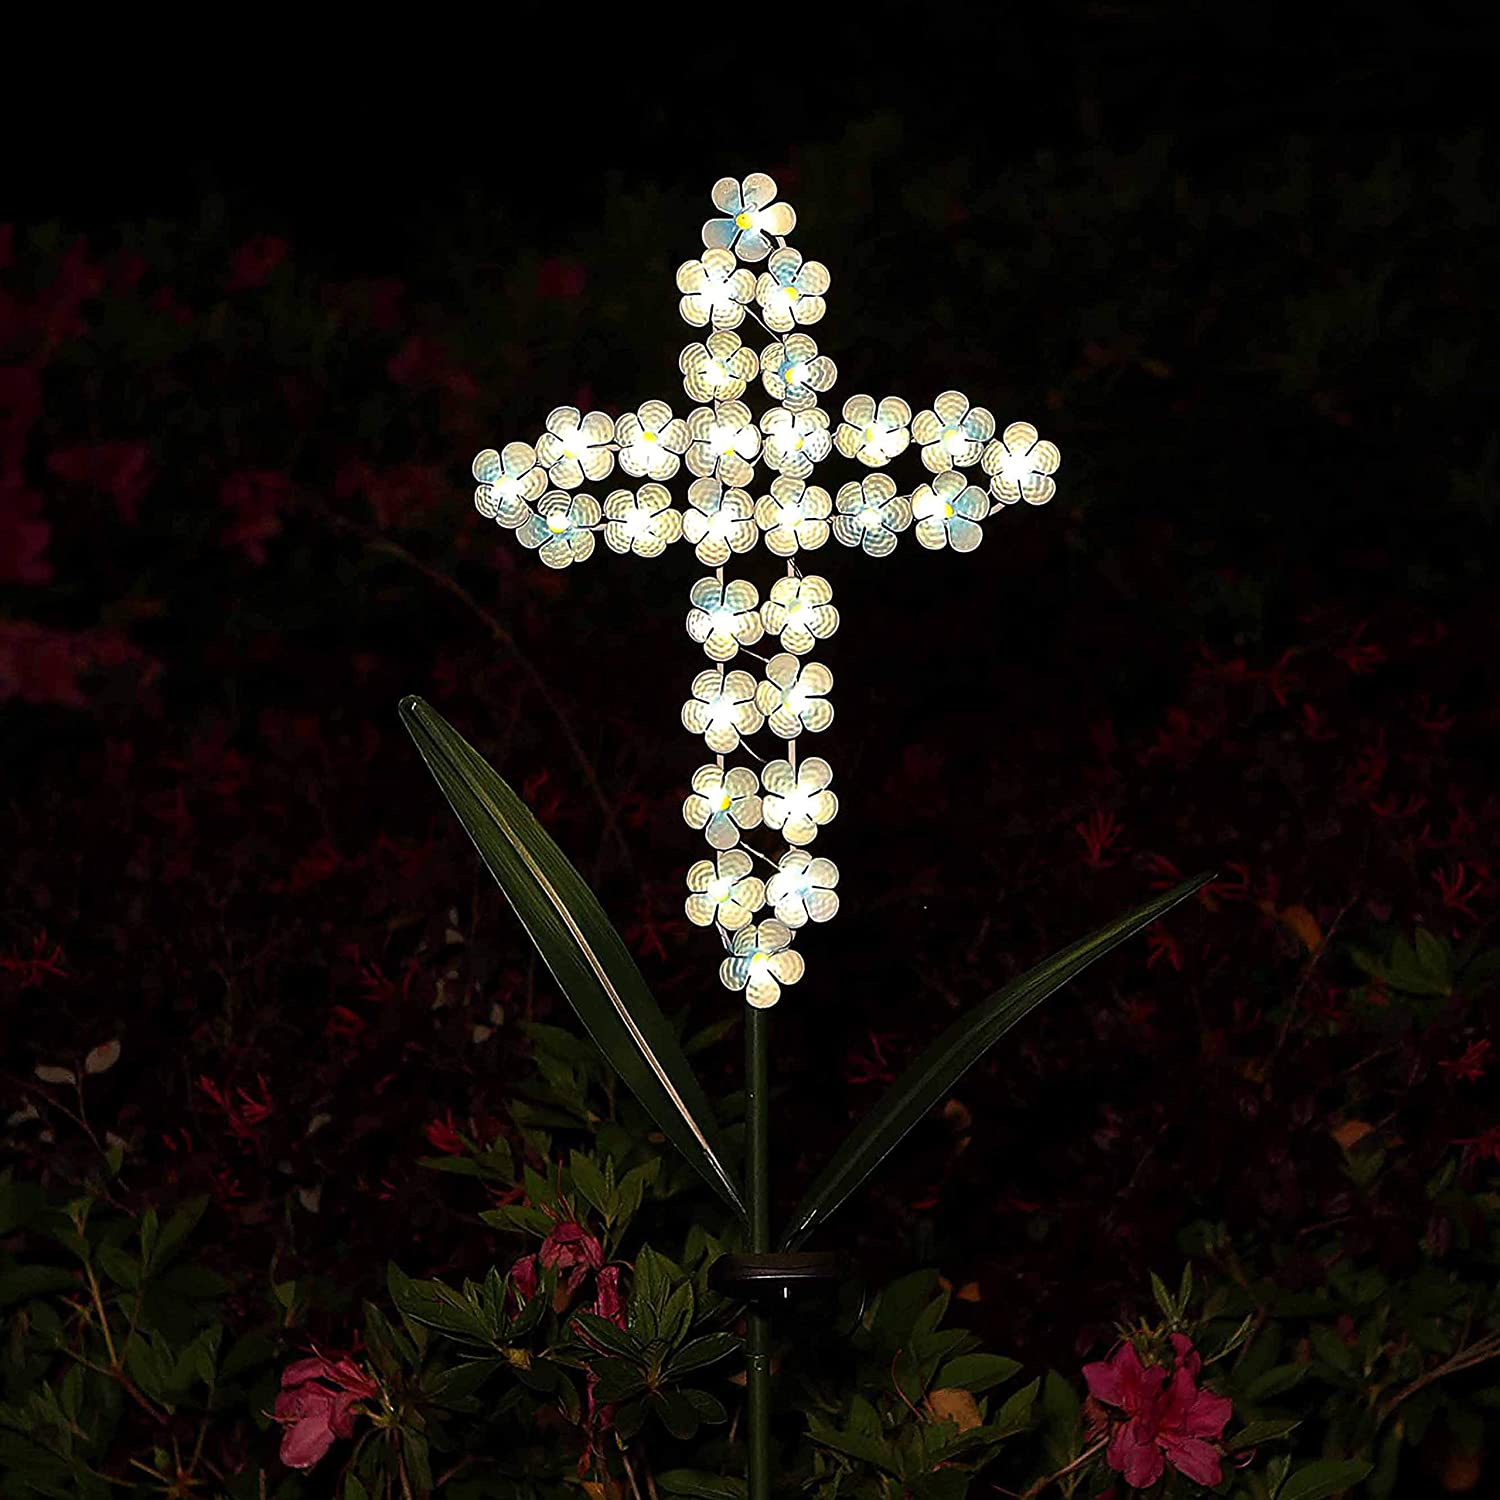 Joyathome Solar Cross Garden Stake Outdoor Lights, 40 Inch Solar Powered Cross Lights Stake with 24 LED Decorative Flower Lights for Remembrance Gifts
